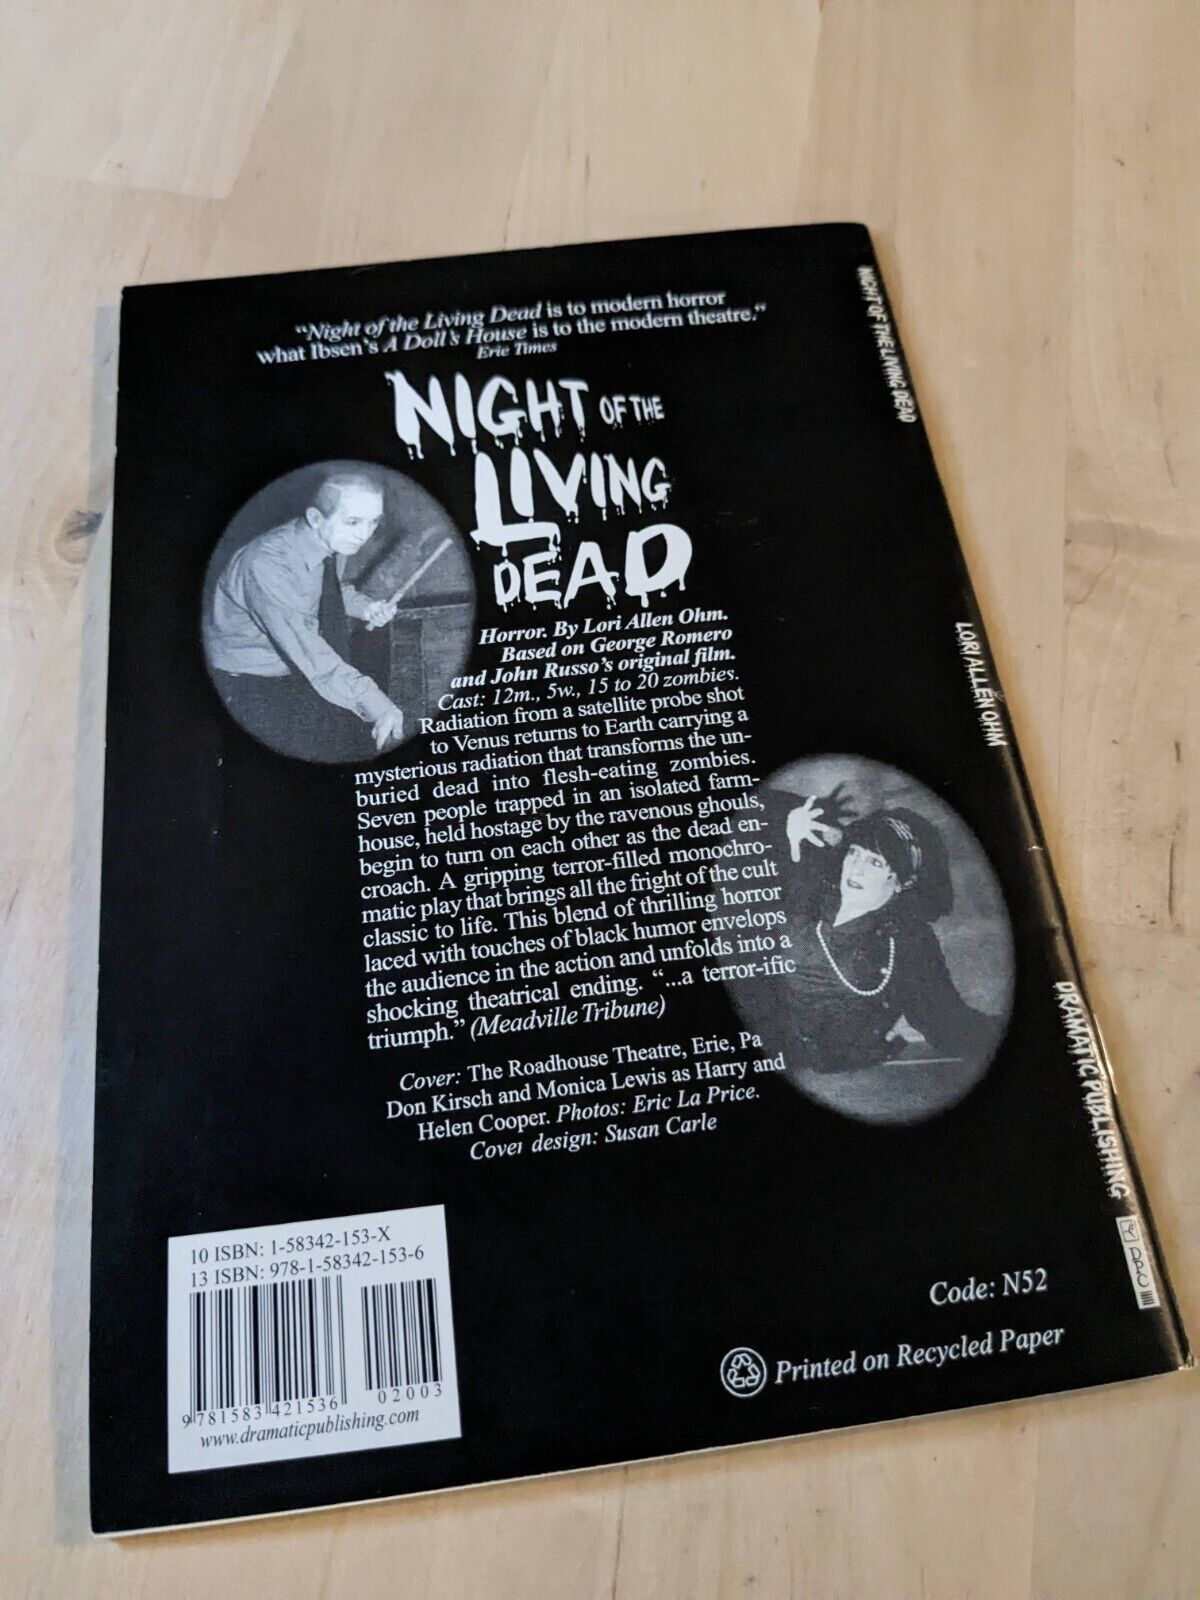 Night of the Living Dead (Theatrical Play Script) by Lori Allen Ohm from the George Romero/John Russo Film - Asylum Books